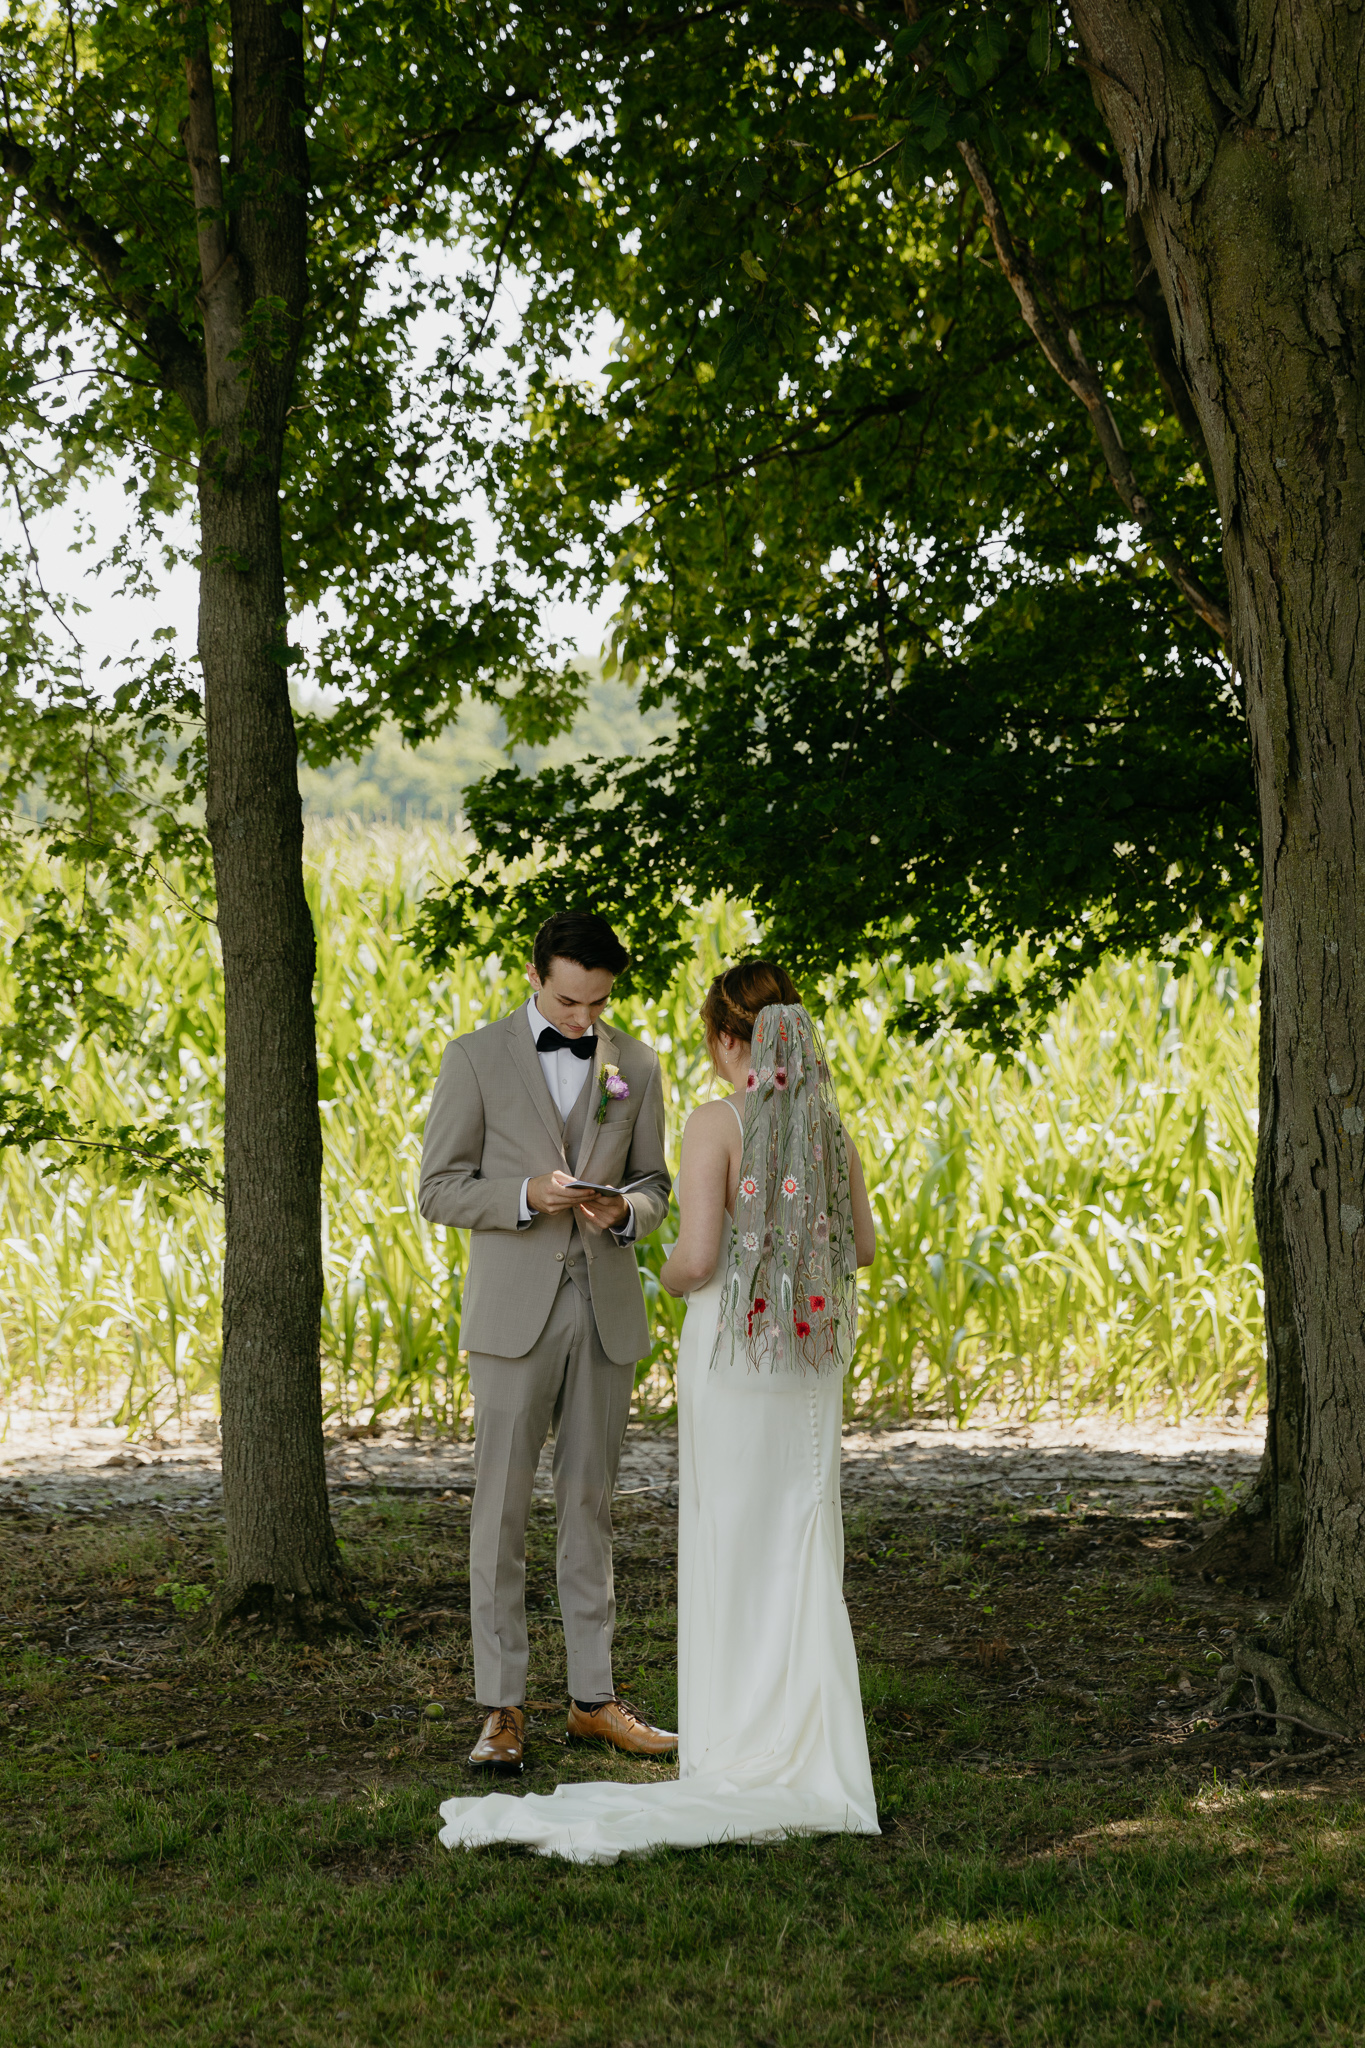 Intimate Indiana Outdoor Wedding // Private Vows